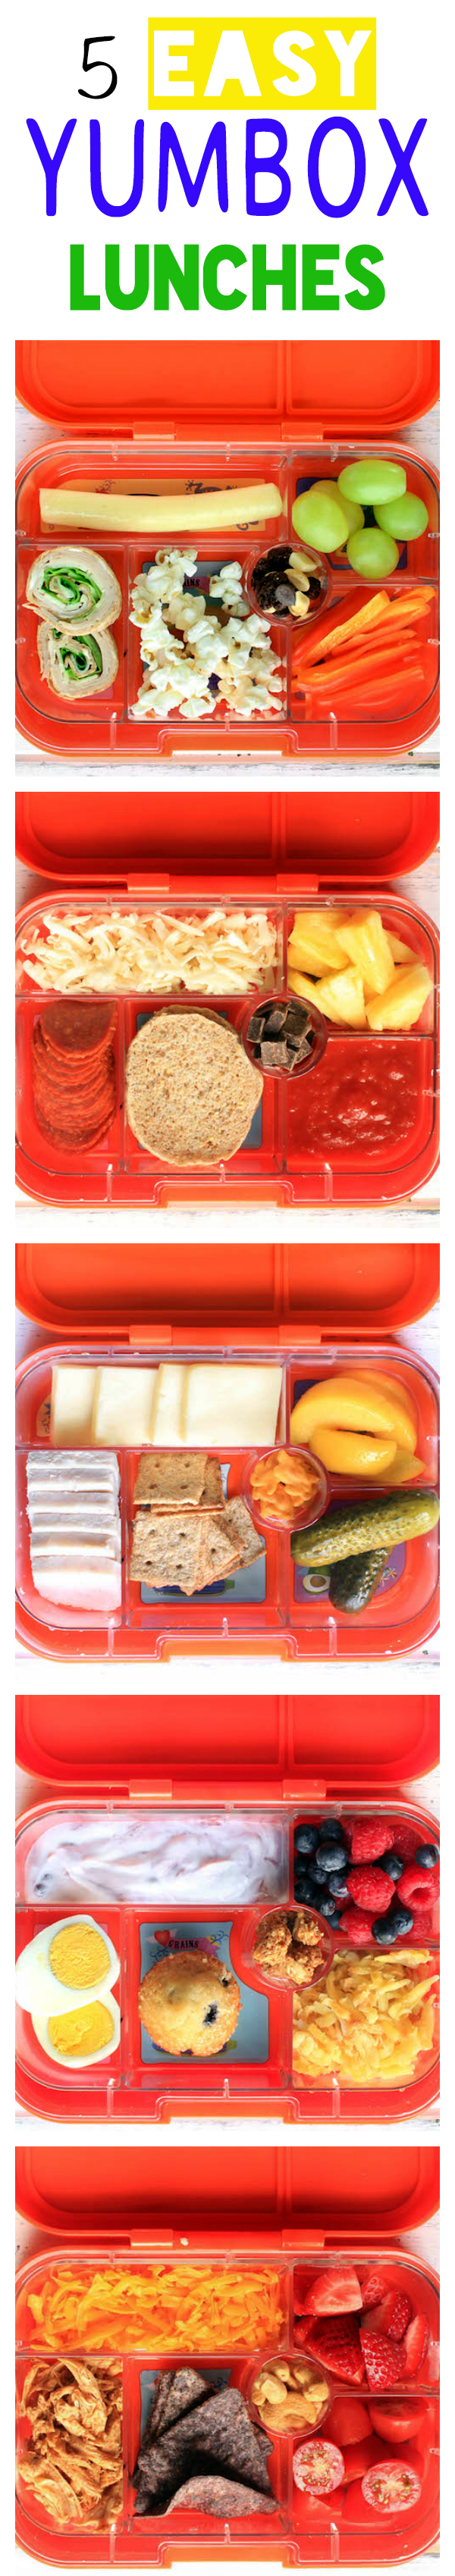 5 Healthy Whole-Food School Lunch Ideas for YumBox. + A GIVEAWAY!!!